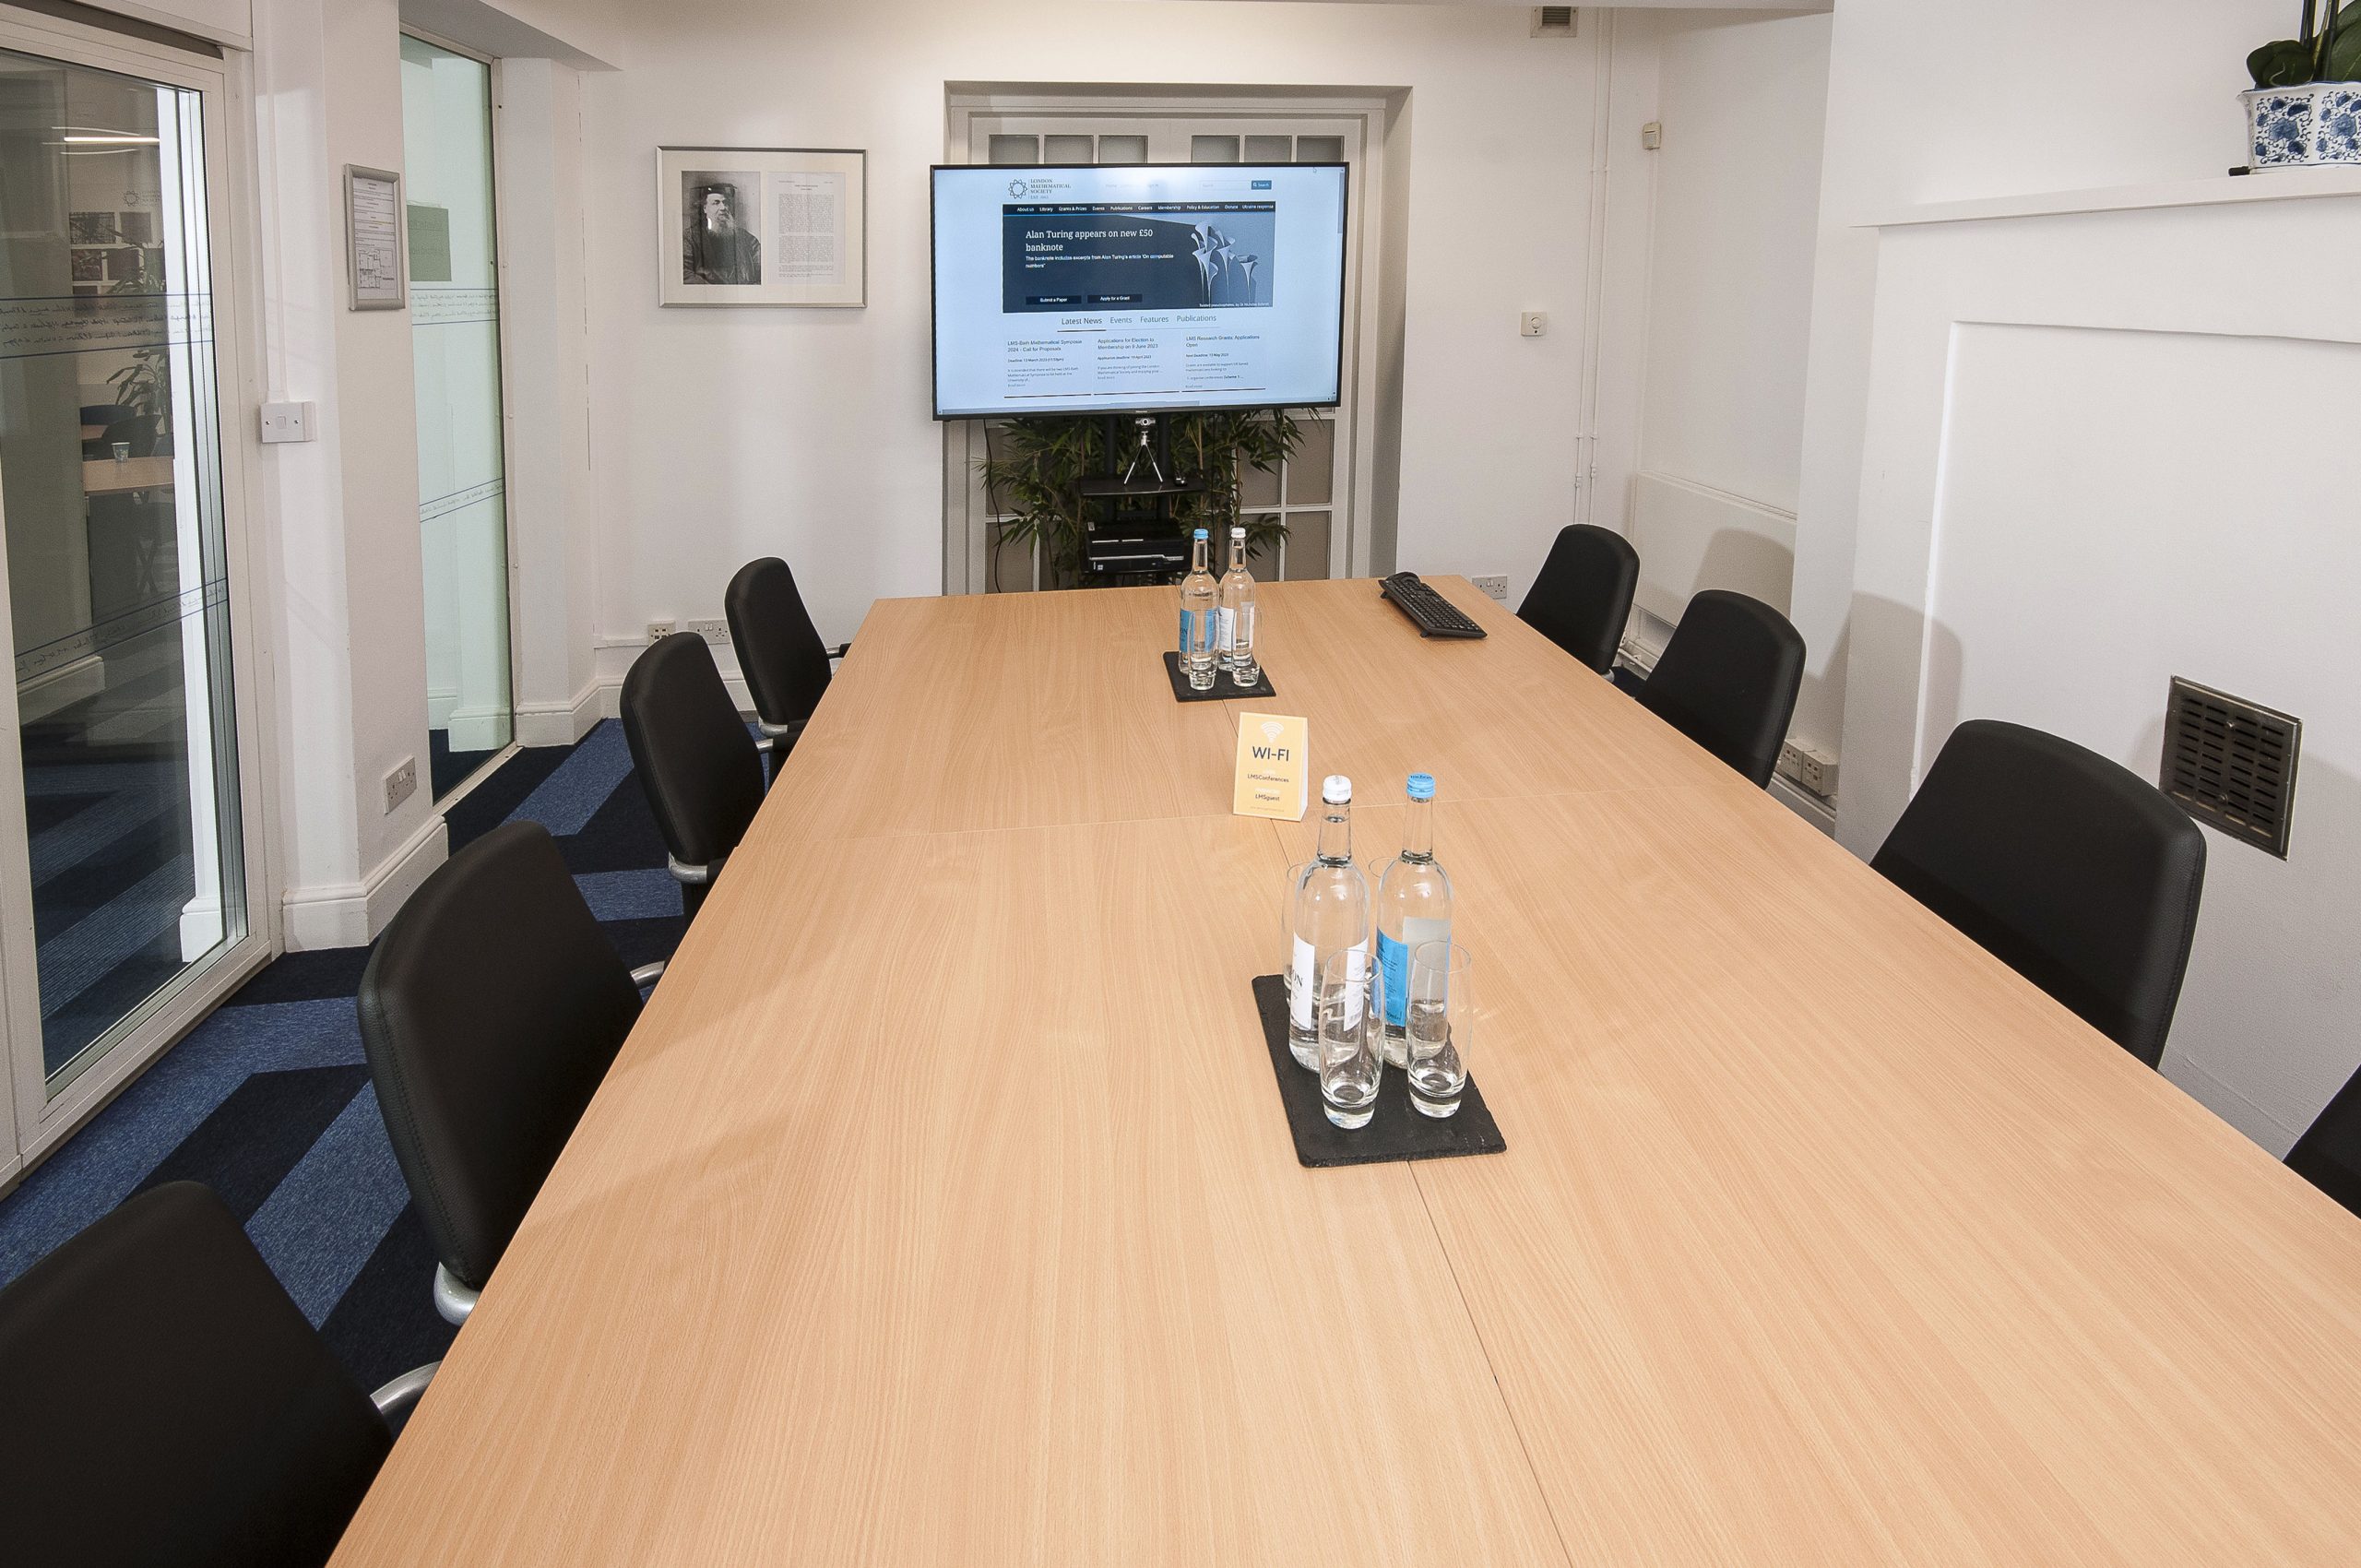 Photo of a small sized meeting room in a boardroom style